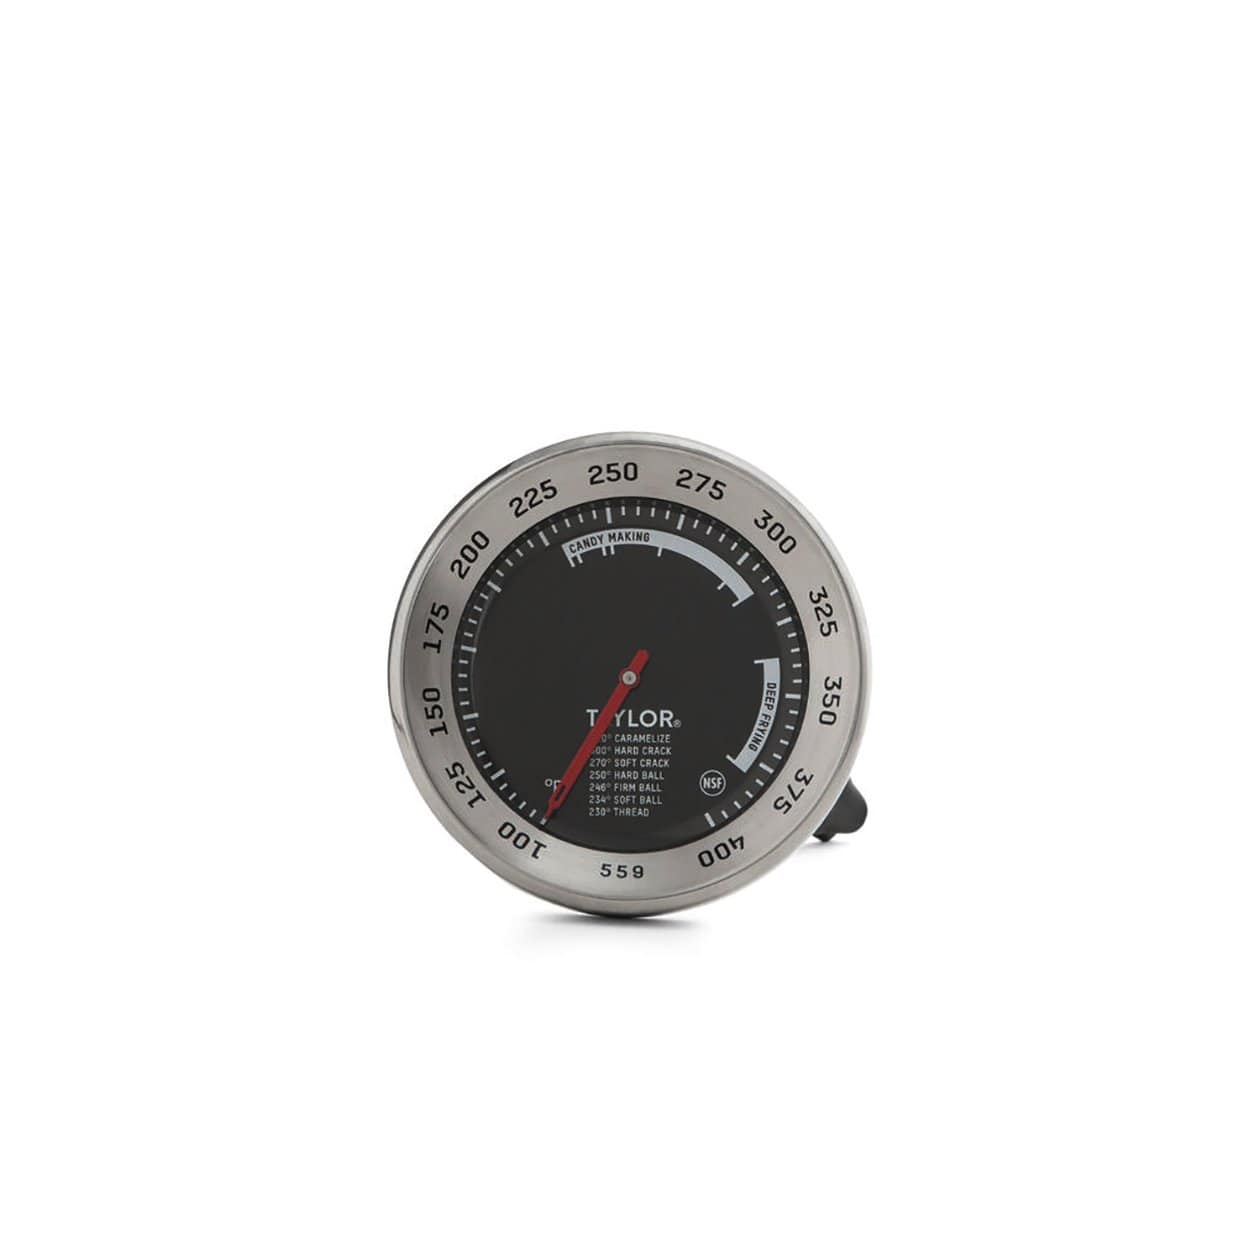 Thermometer, Deep-frying Thermometer With Dial, Oven Thermometer